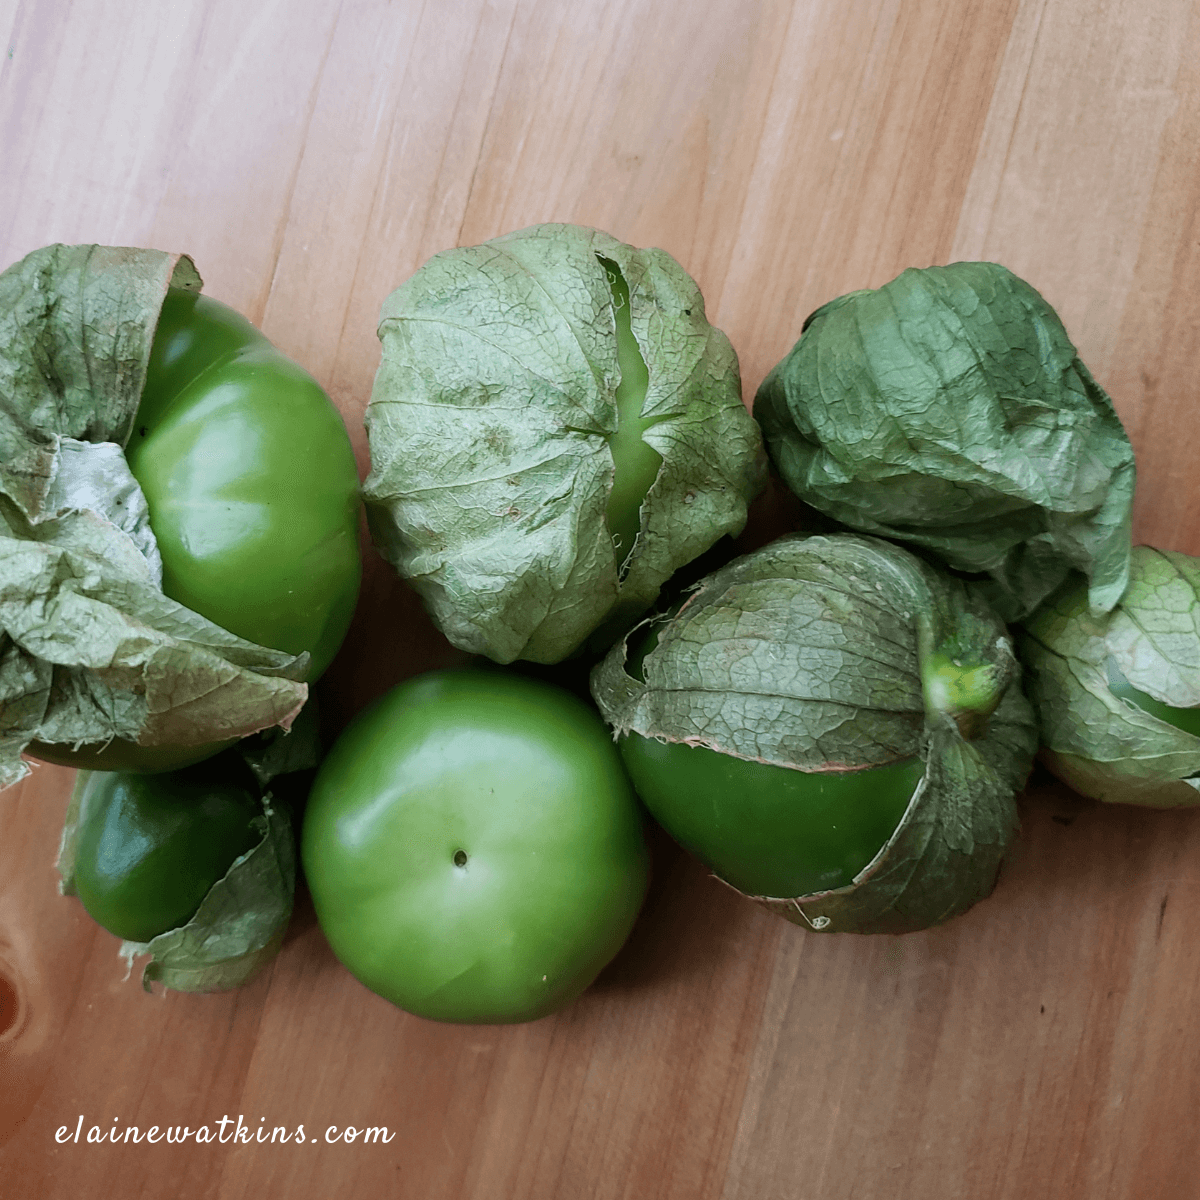 Tomatillo Salsa Verde (aka That Green Sauce at the Mexican Restaurant)